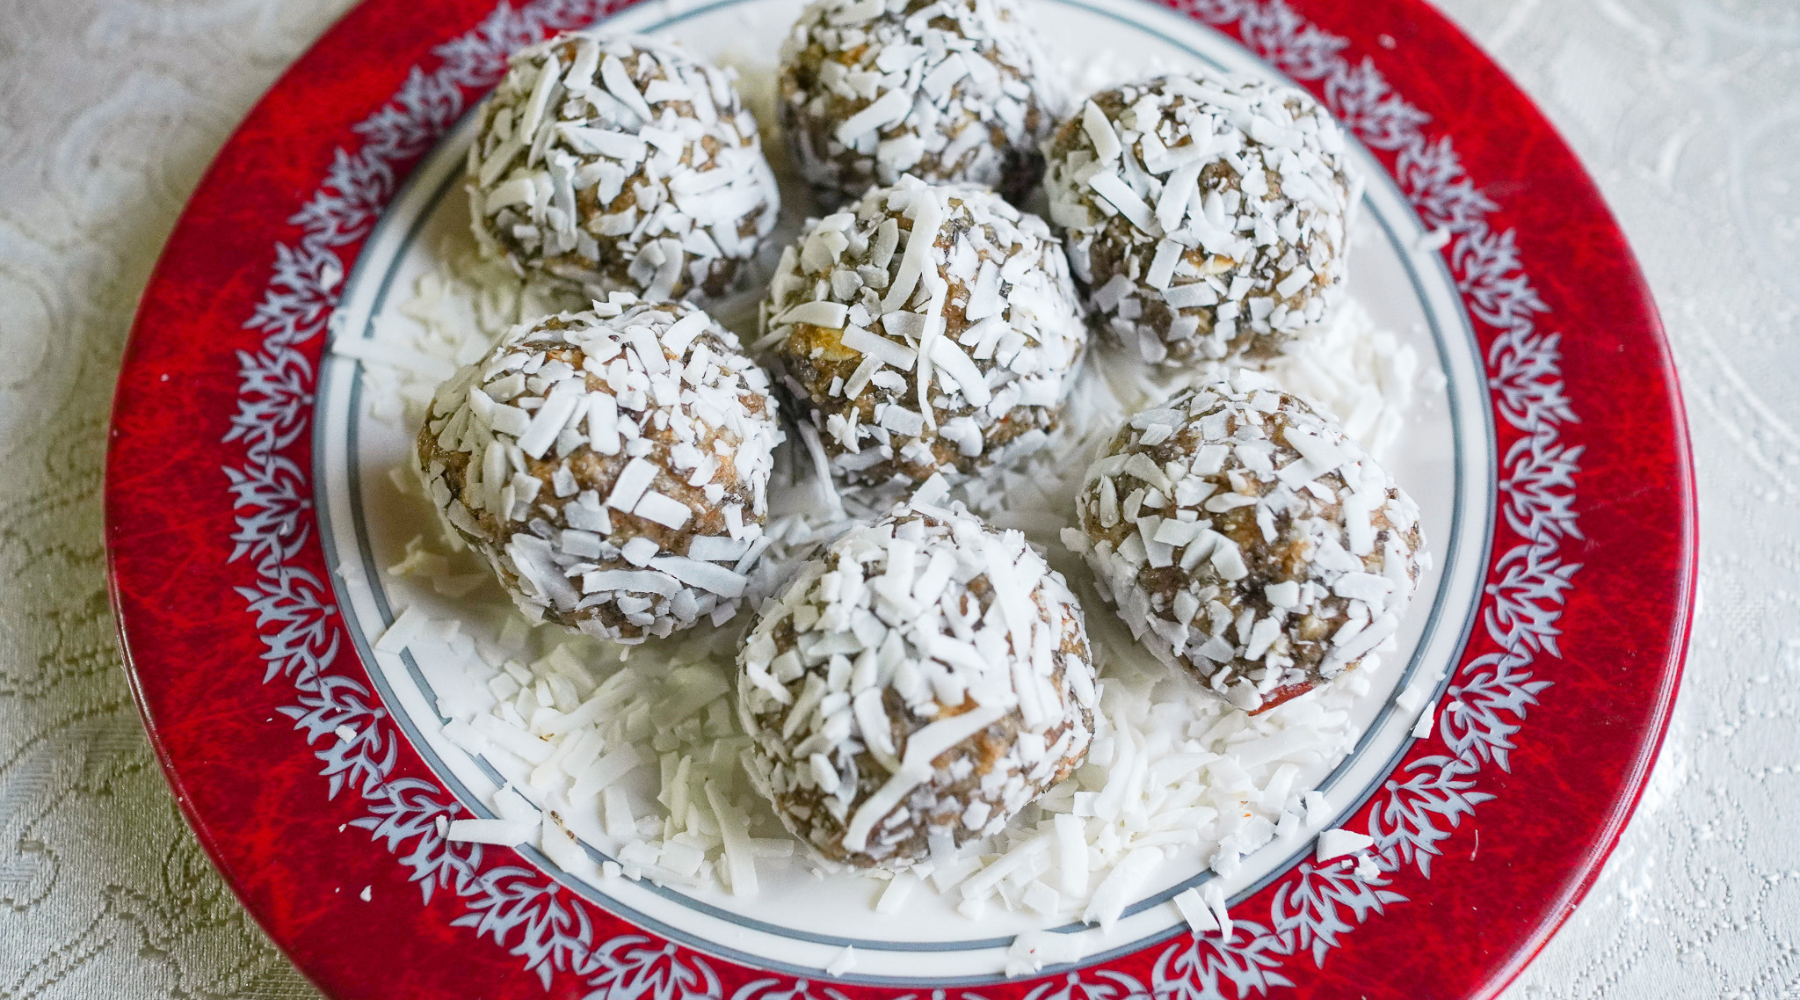 Energy Coconut Truffles - A High-Protein, Gluten-Free, Energy-Boosting Snack